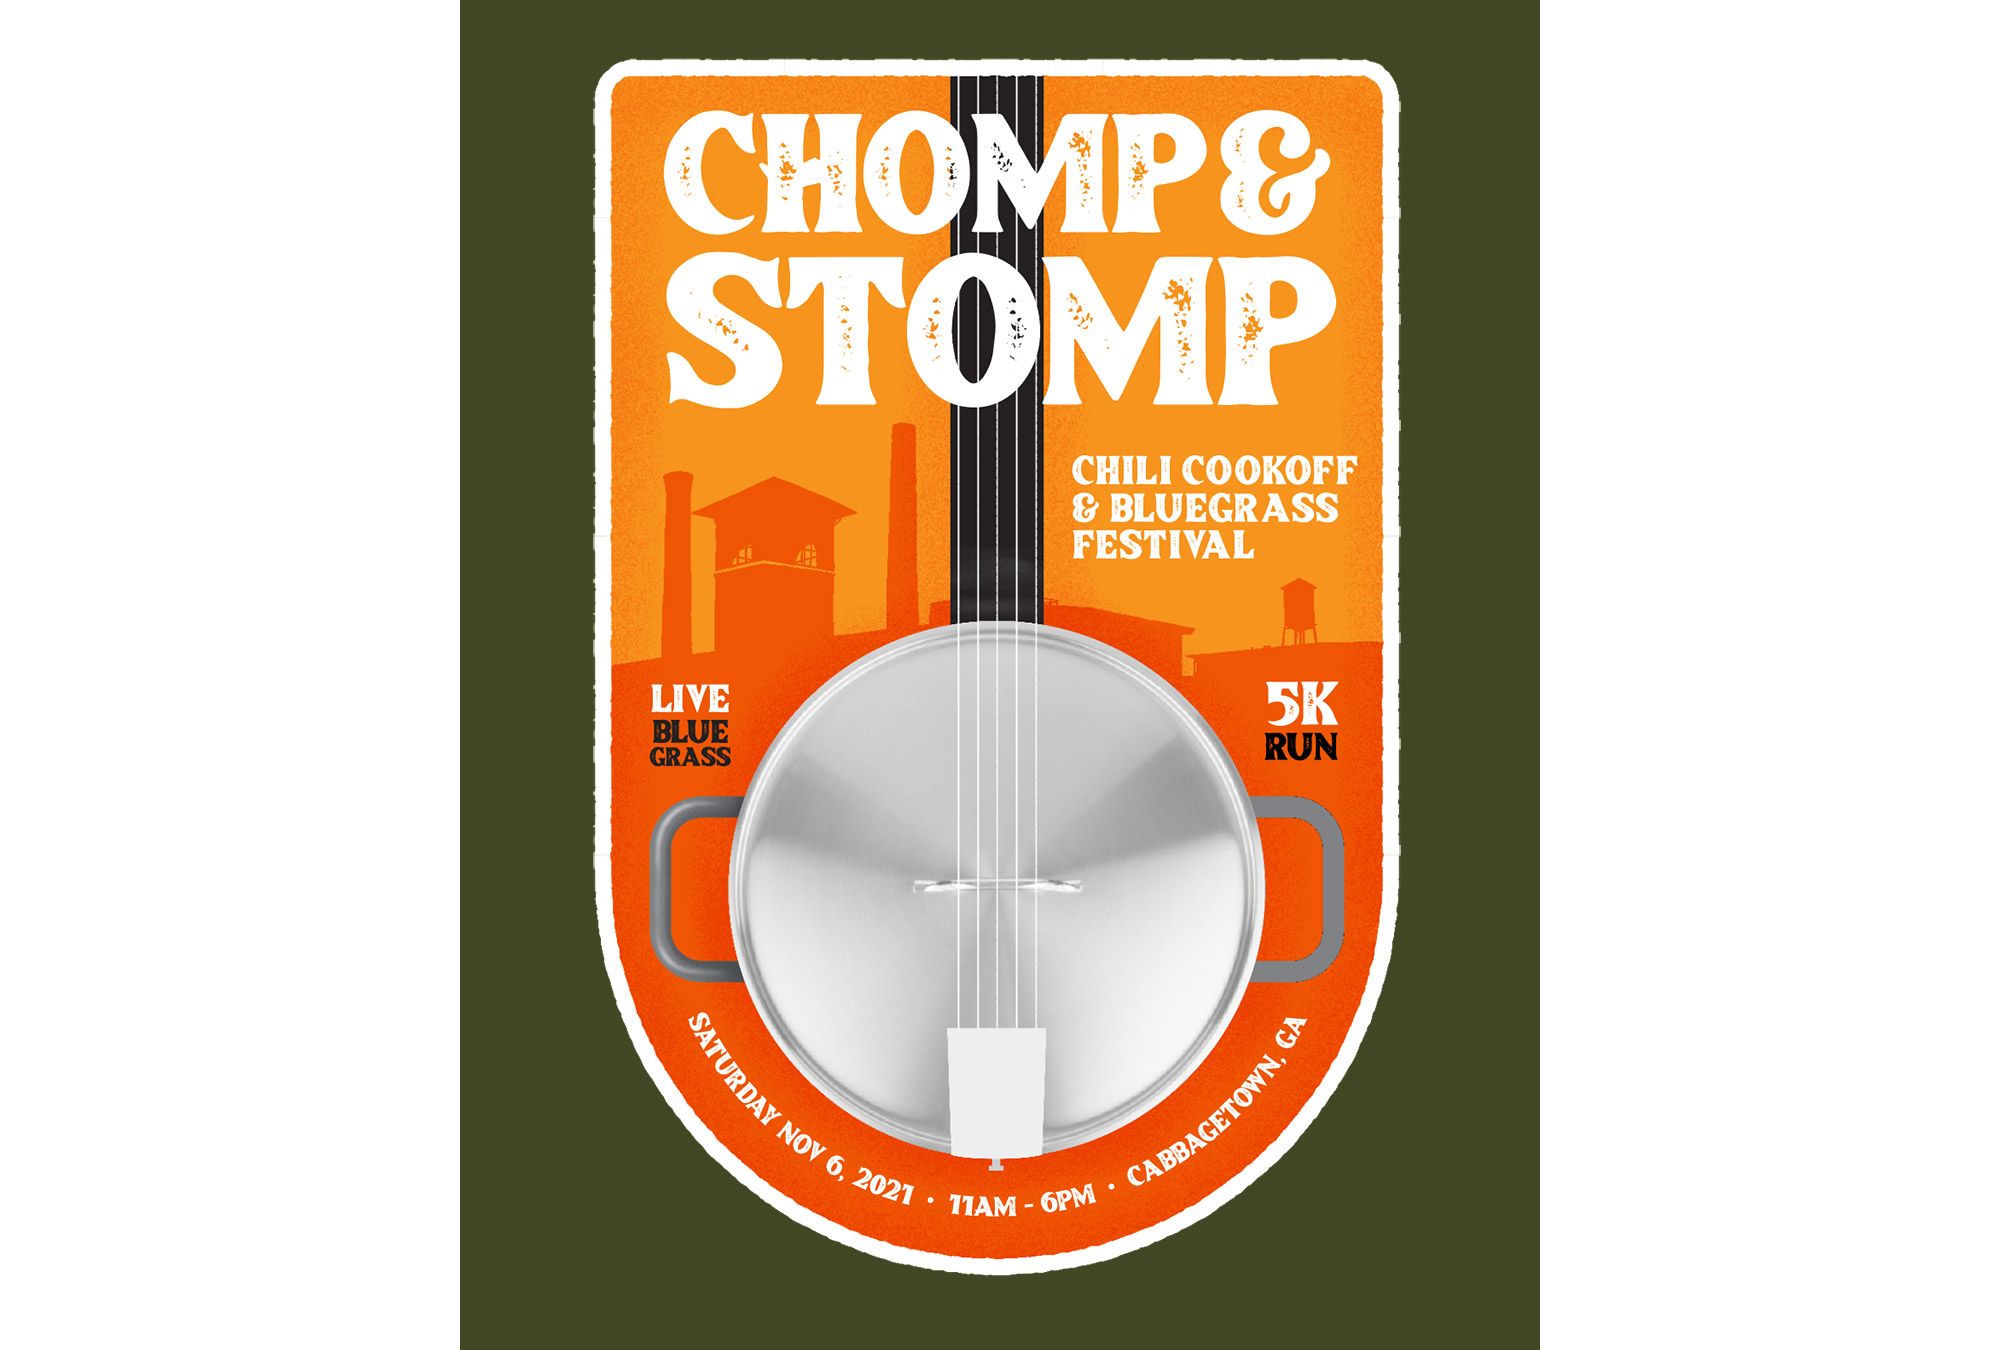 The original event poster for Chomp & Stomp event. The image features a chili pot as the base of a banjo. Behind the chili pot is the recognizable skyline of the Cabbagetown neighborhood in Atlanta, Ga where Chomp & Stomp occurs.